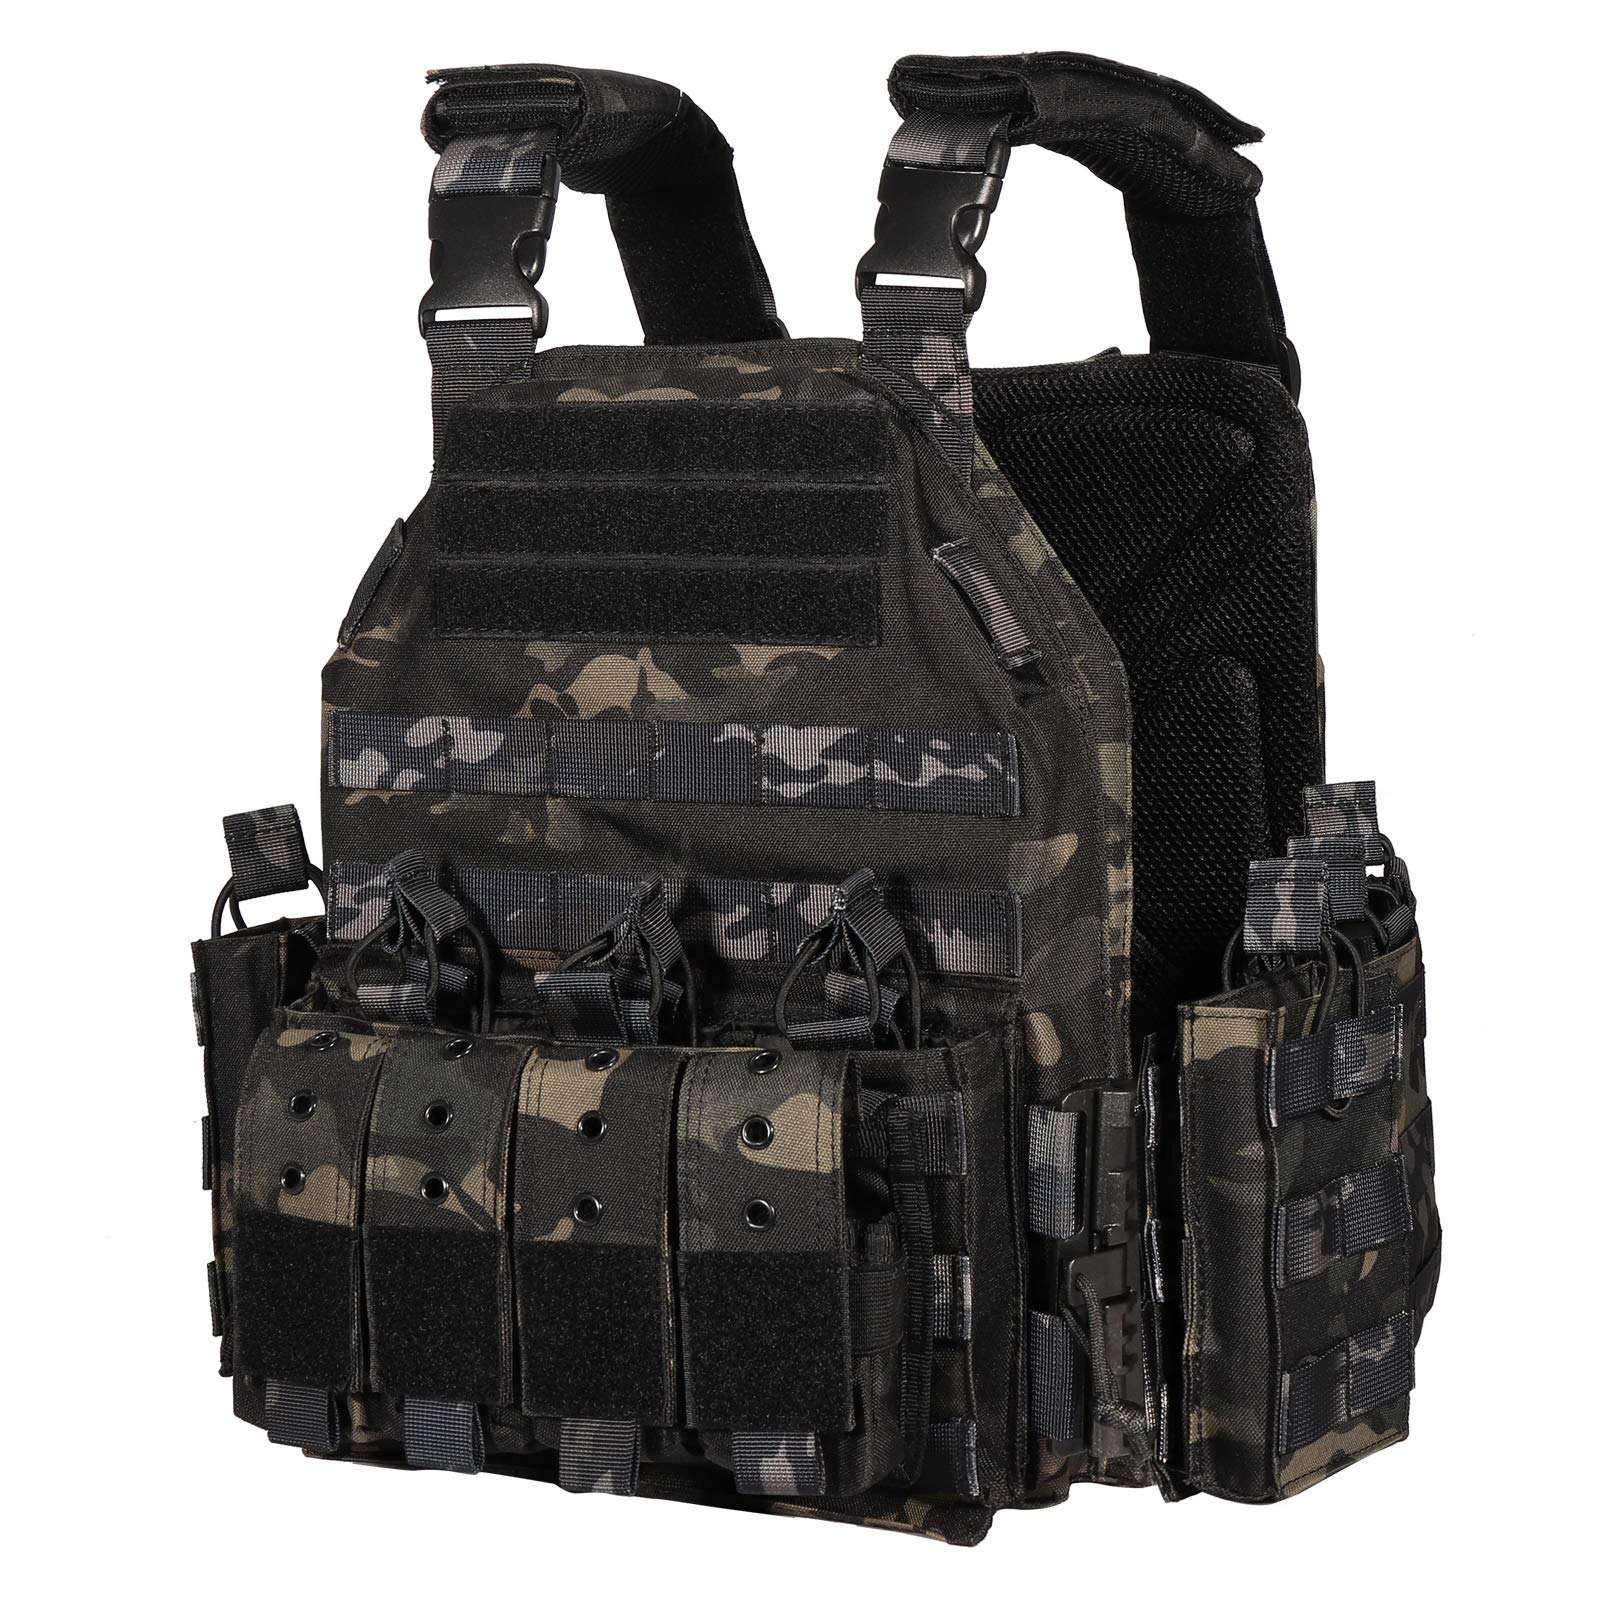 Black Camouflage Vest 1000D High Quality Outdoor Training Waterproof Comfortable Tactical Vest